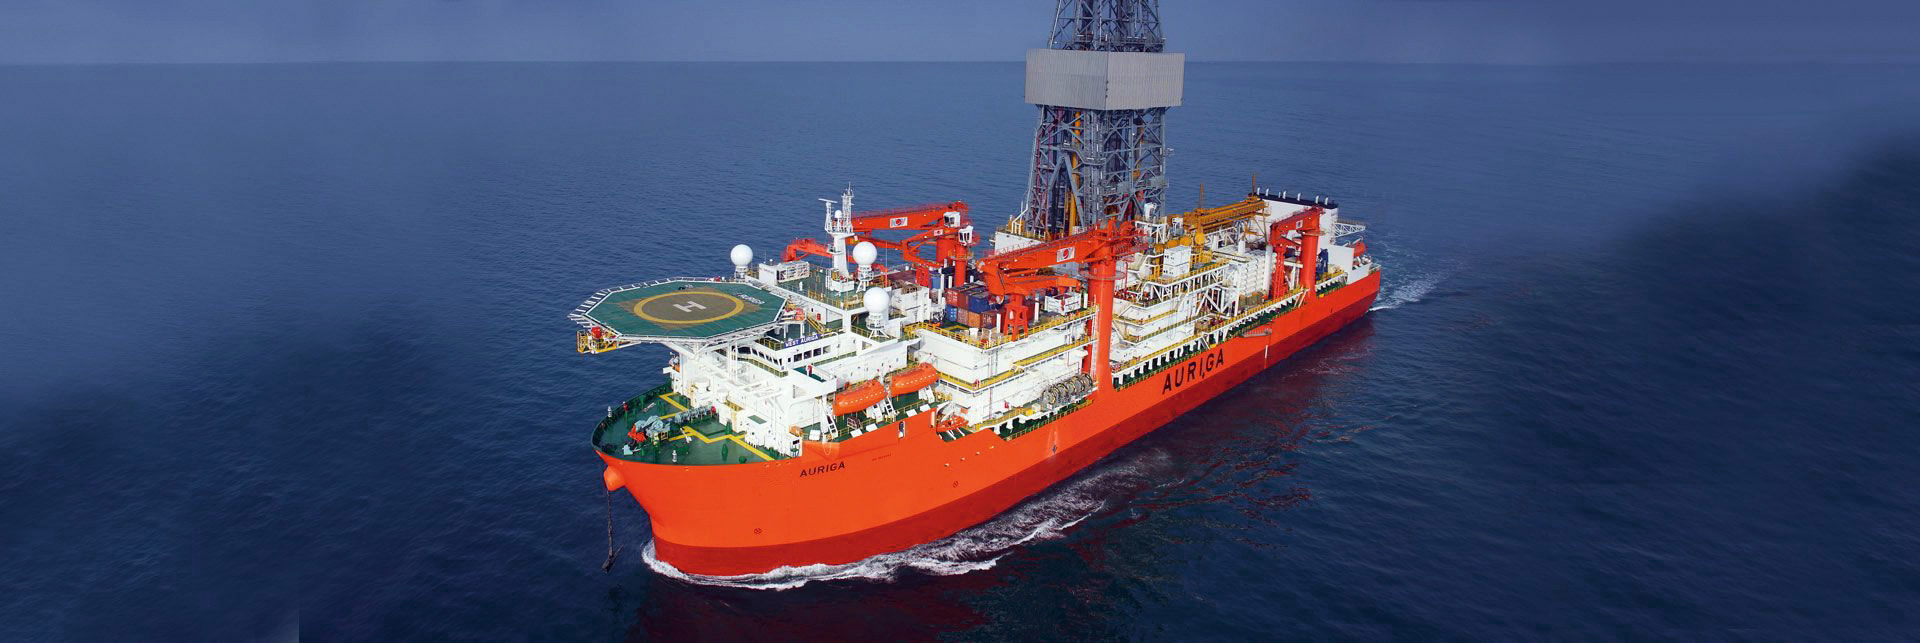 More time for Aquadrill drillship in Gulf of Mexico